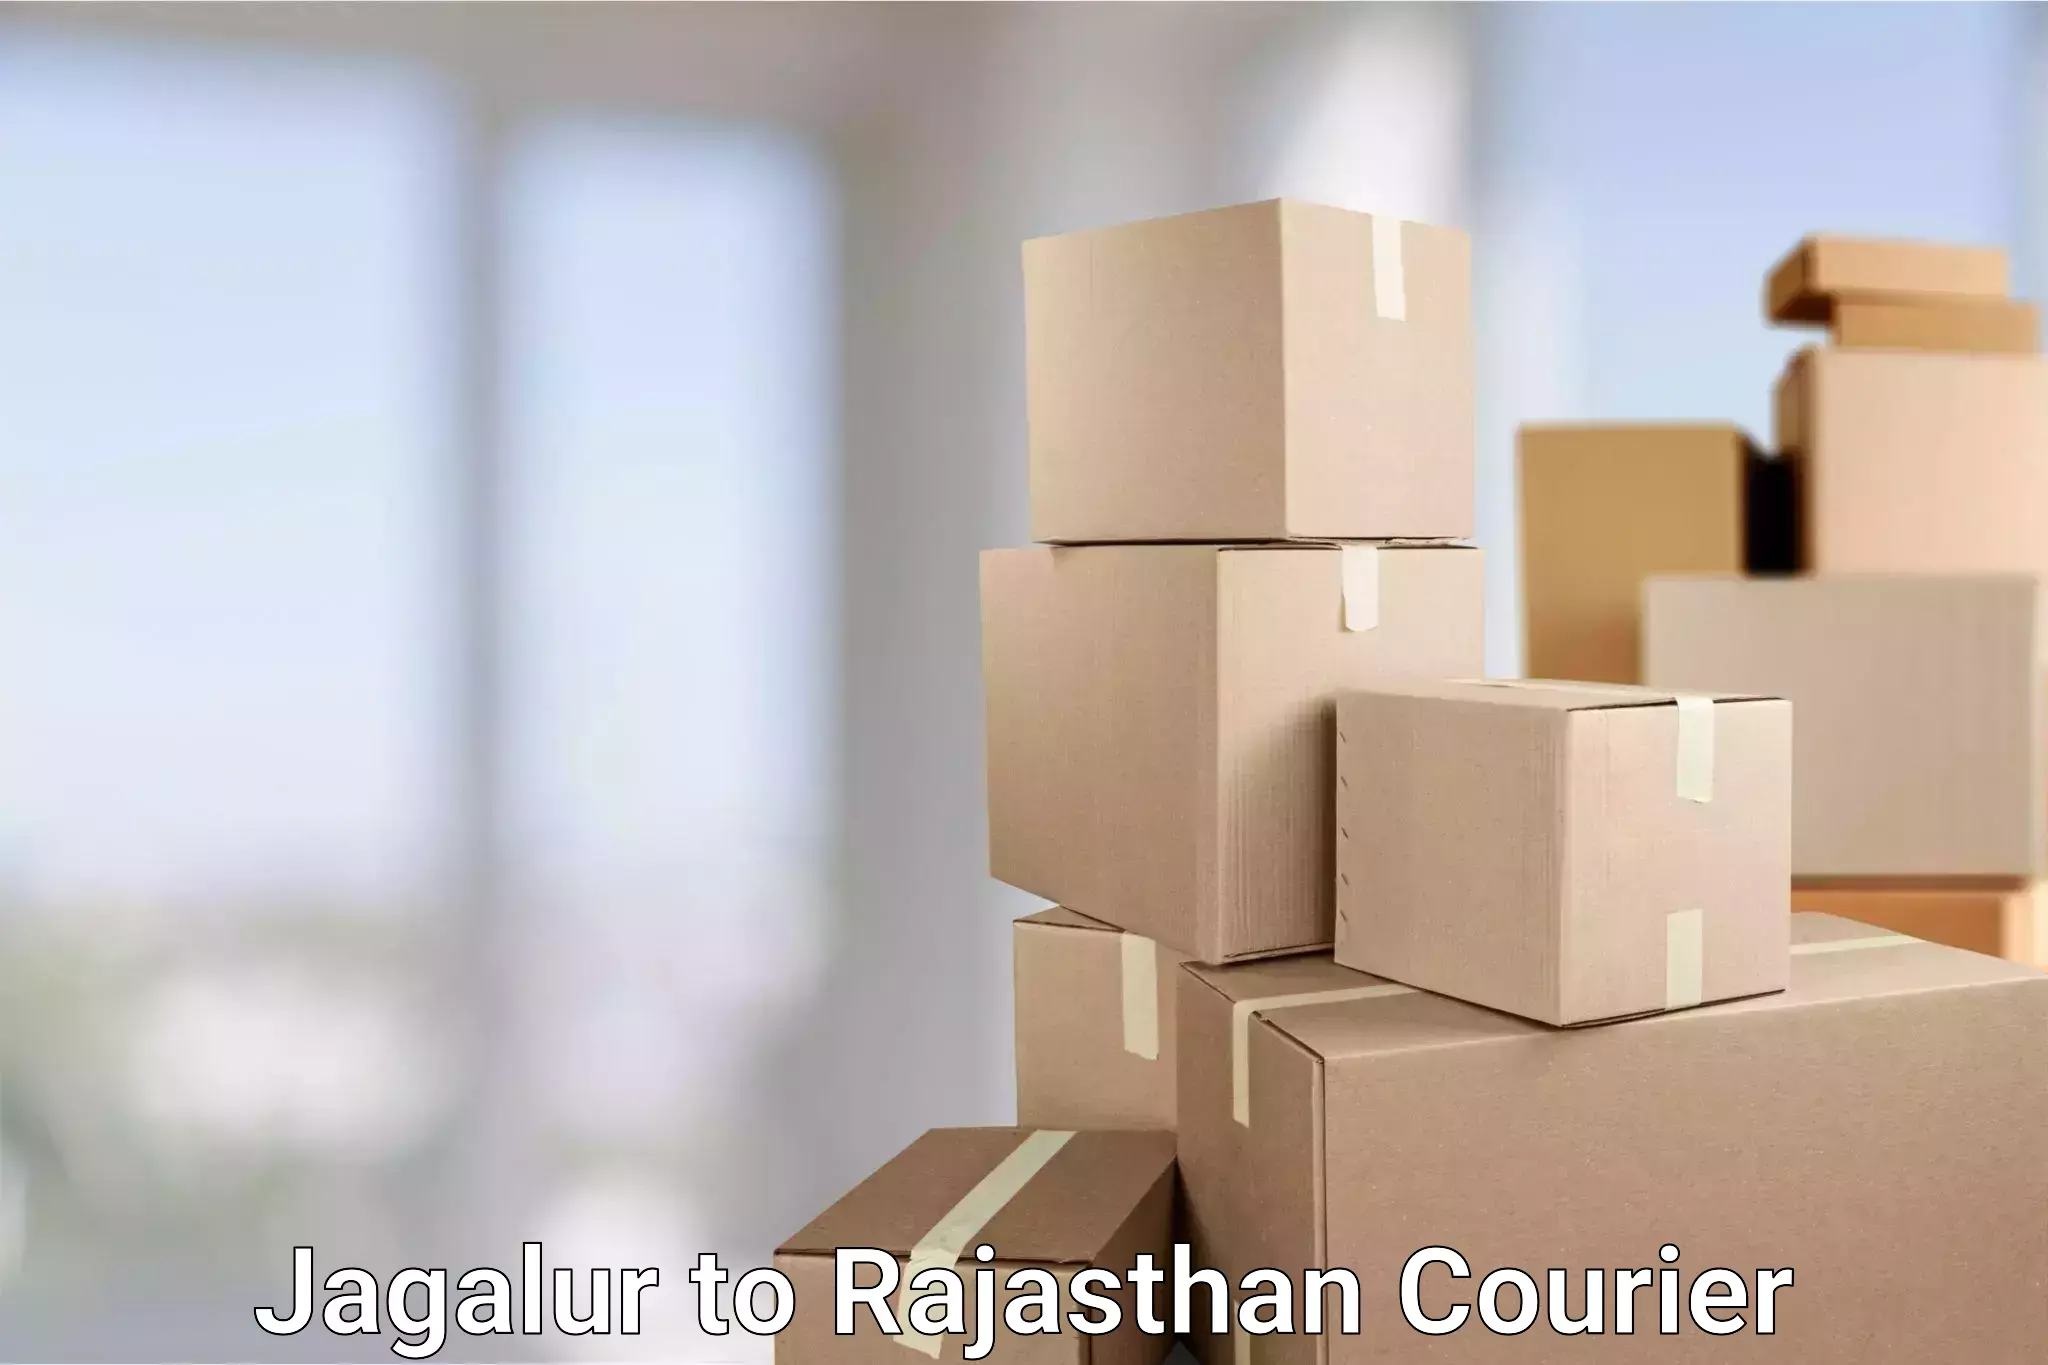 Advanced parcel tracking in Jagalur to Jaipur